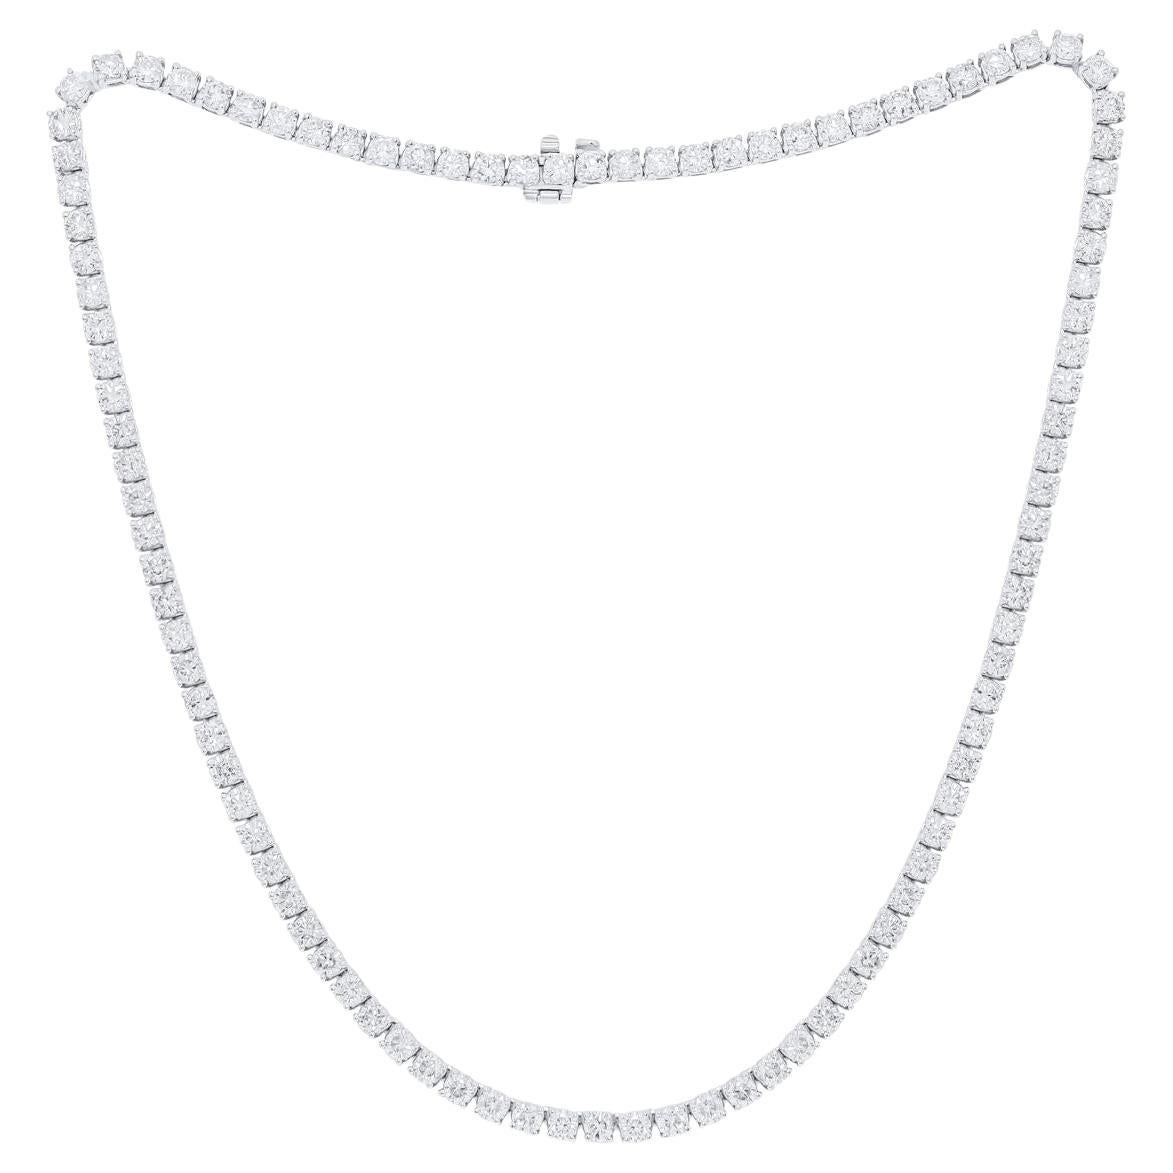 Diana M. 18 kt white gold, 16" 4 prong diamond tennis necklace containing 21.25 